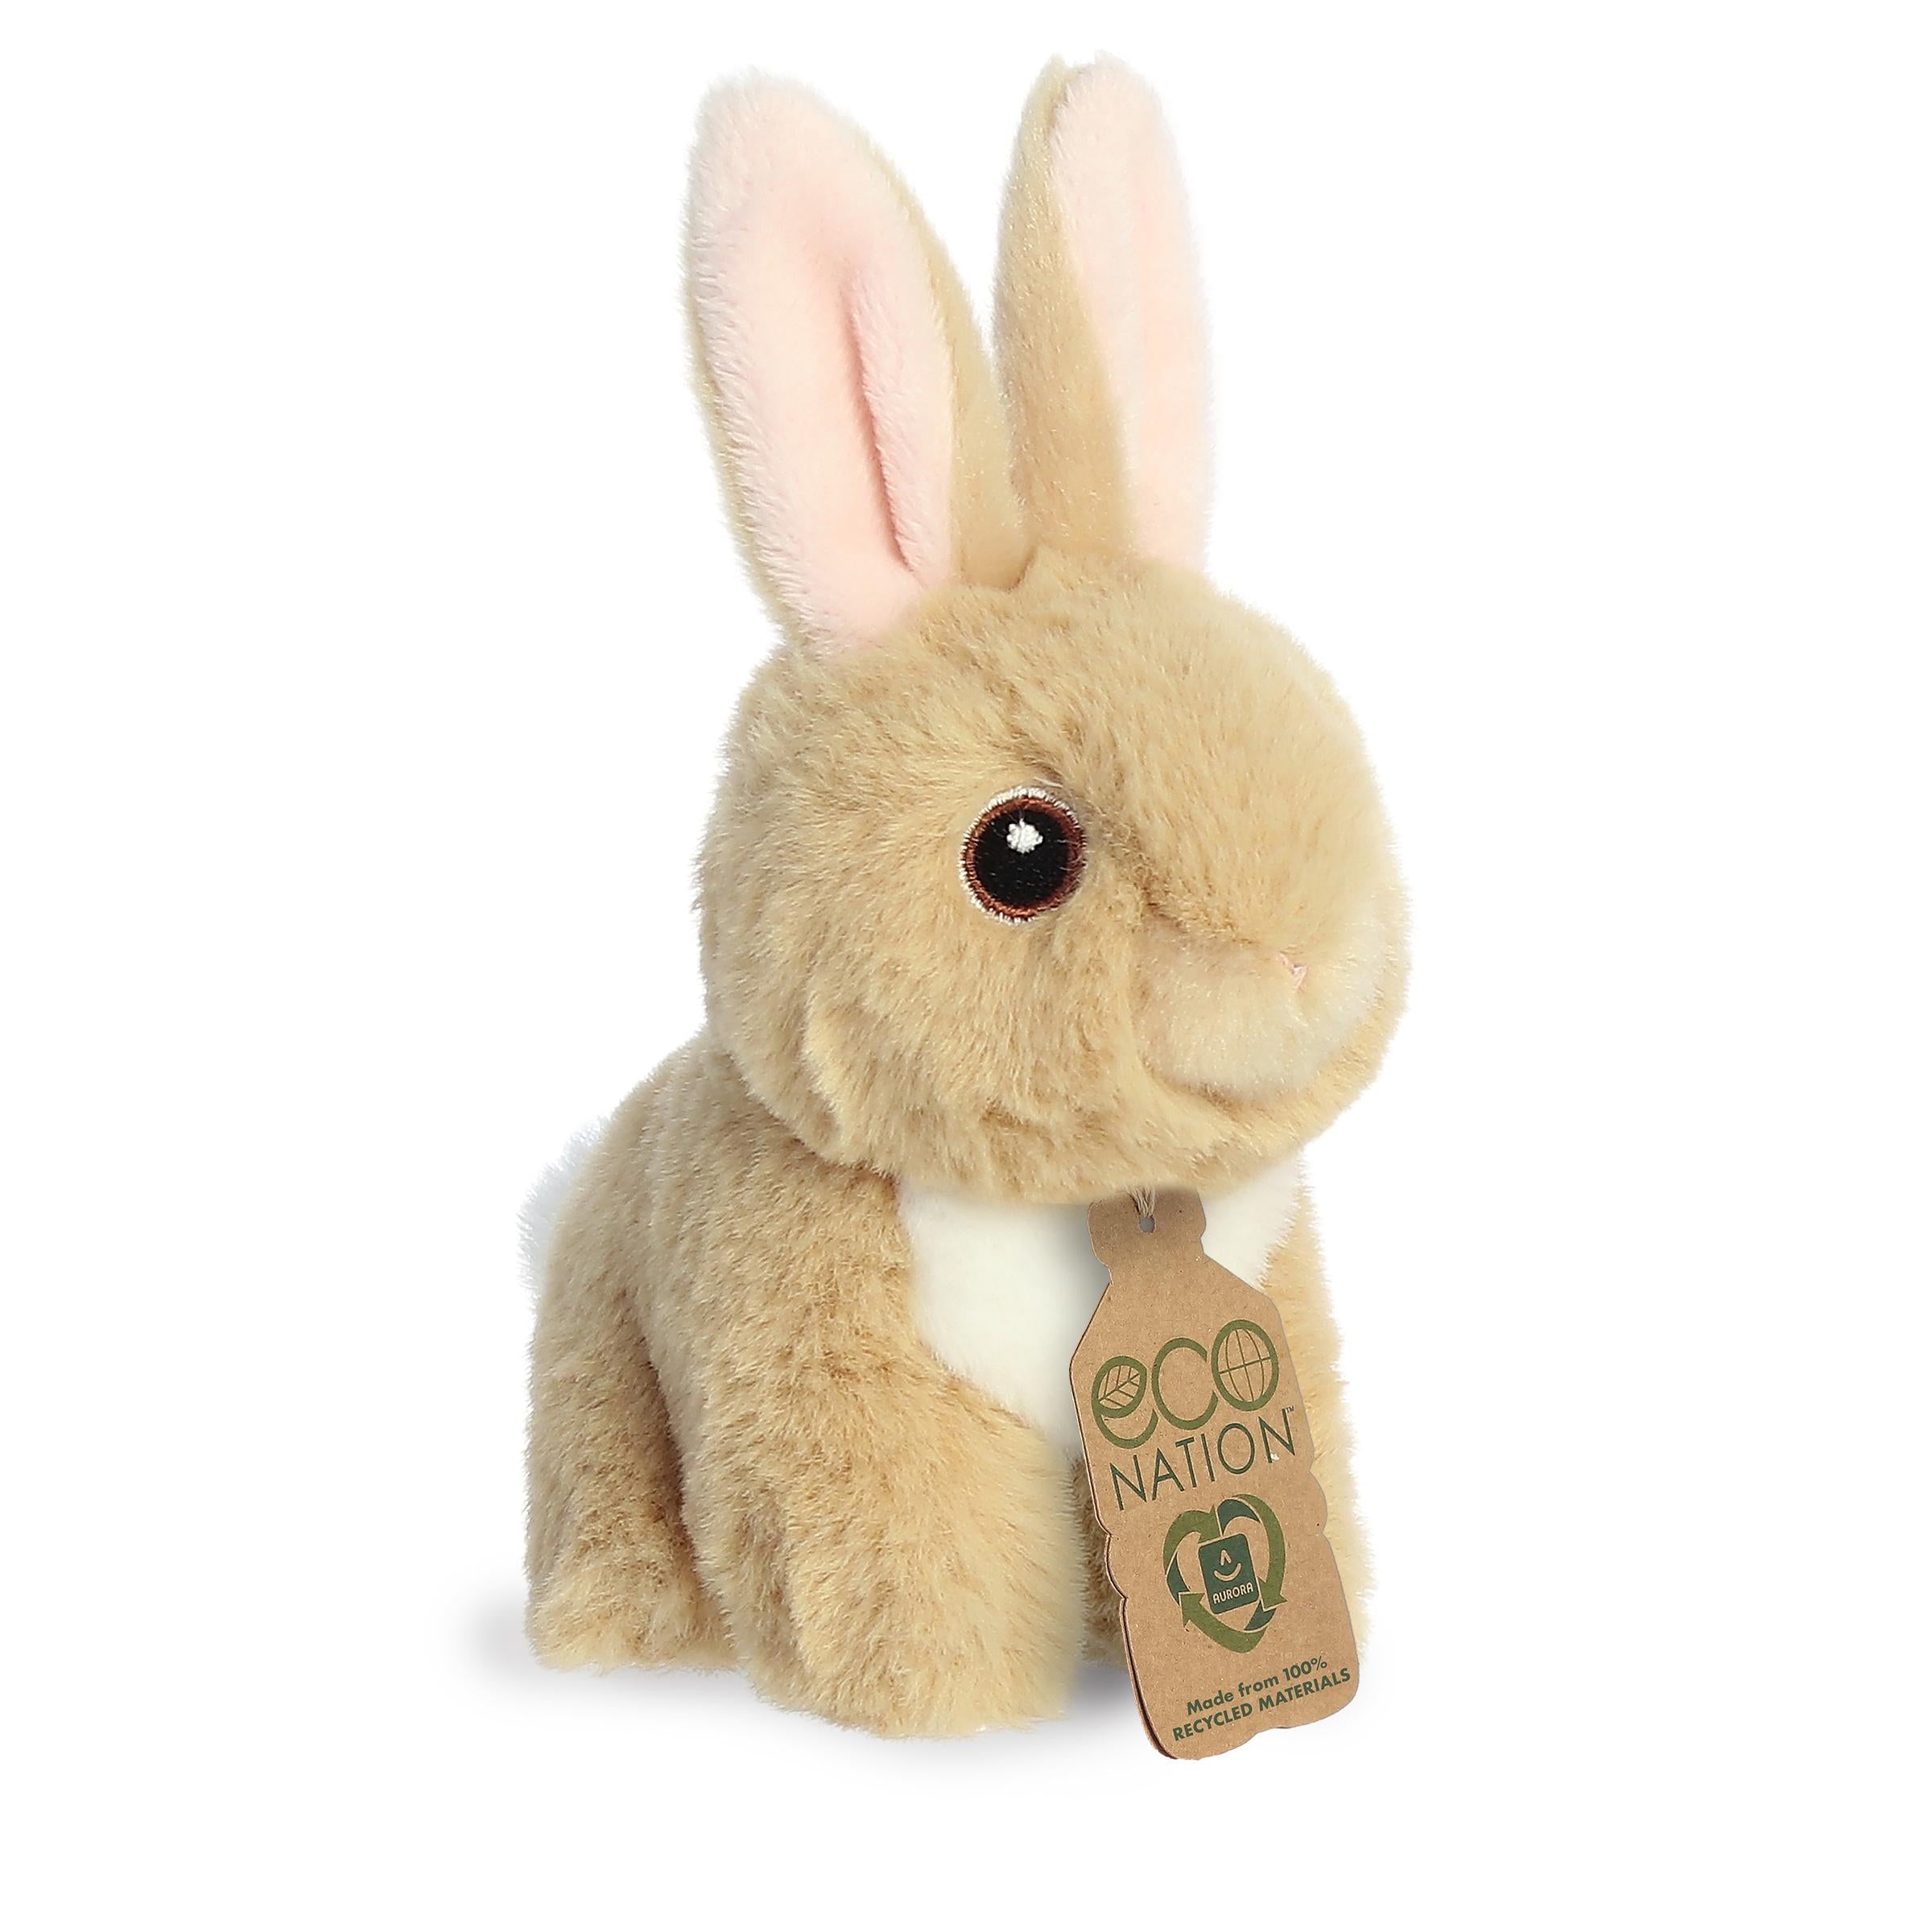 Where to Find Organic, Eco Friendly Stuffed Animals - tiny yellow